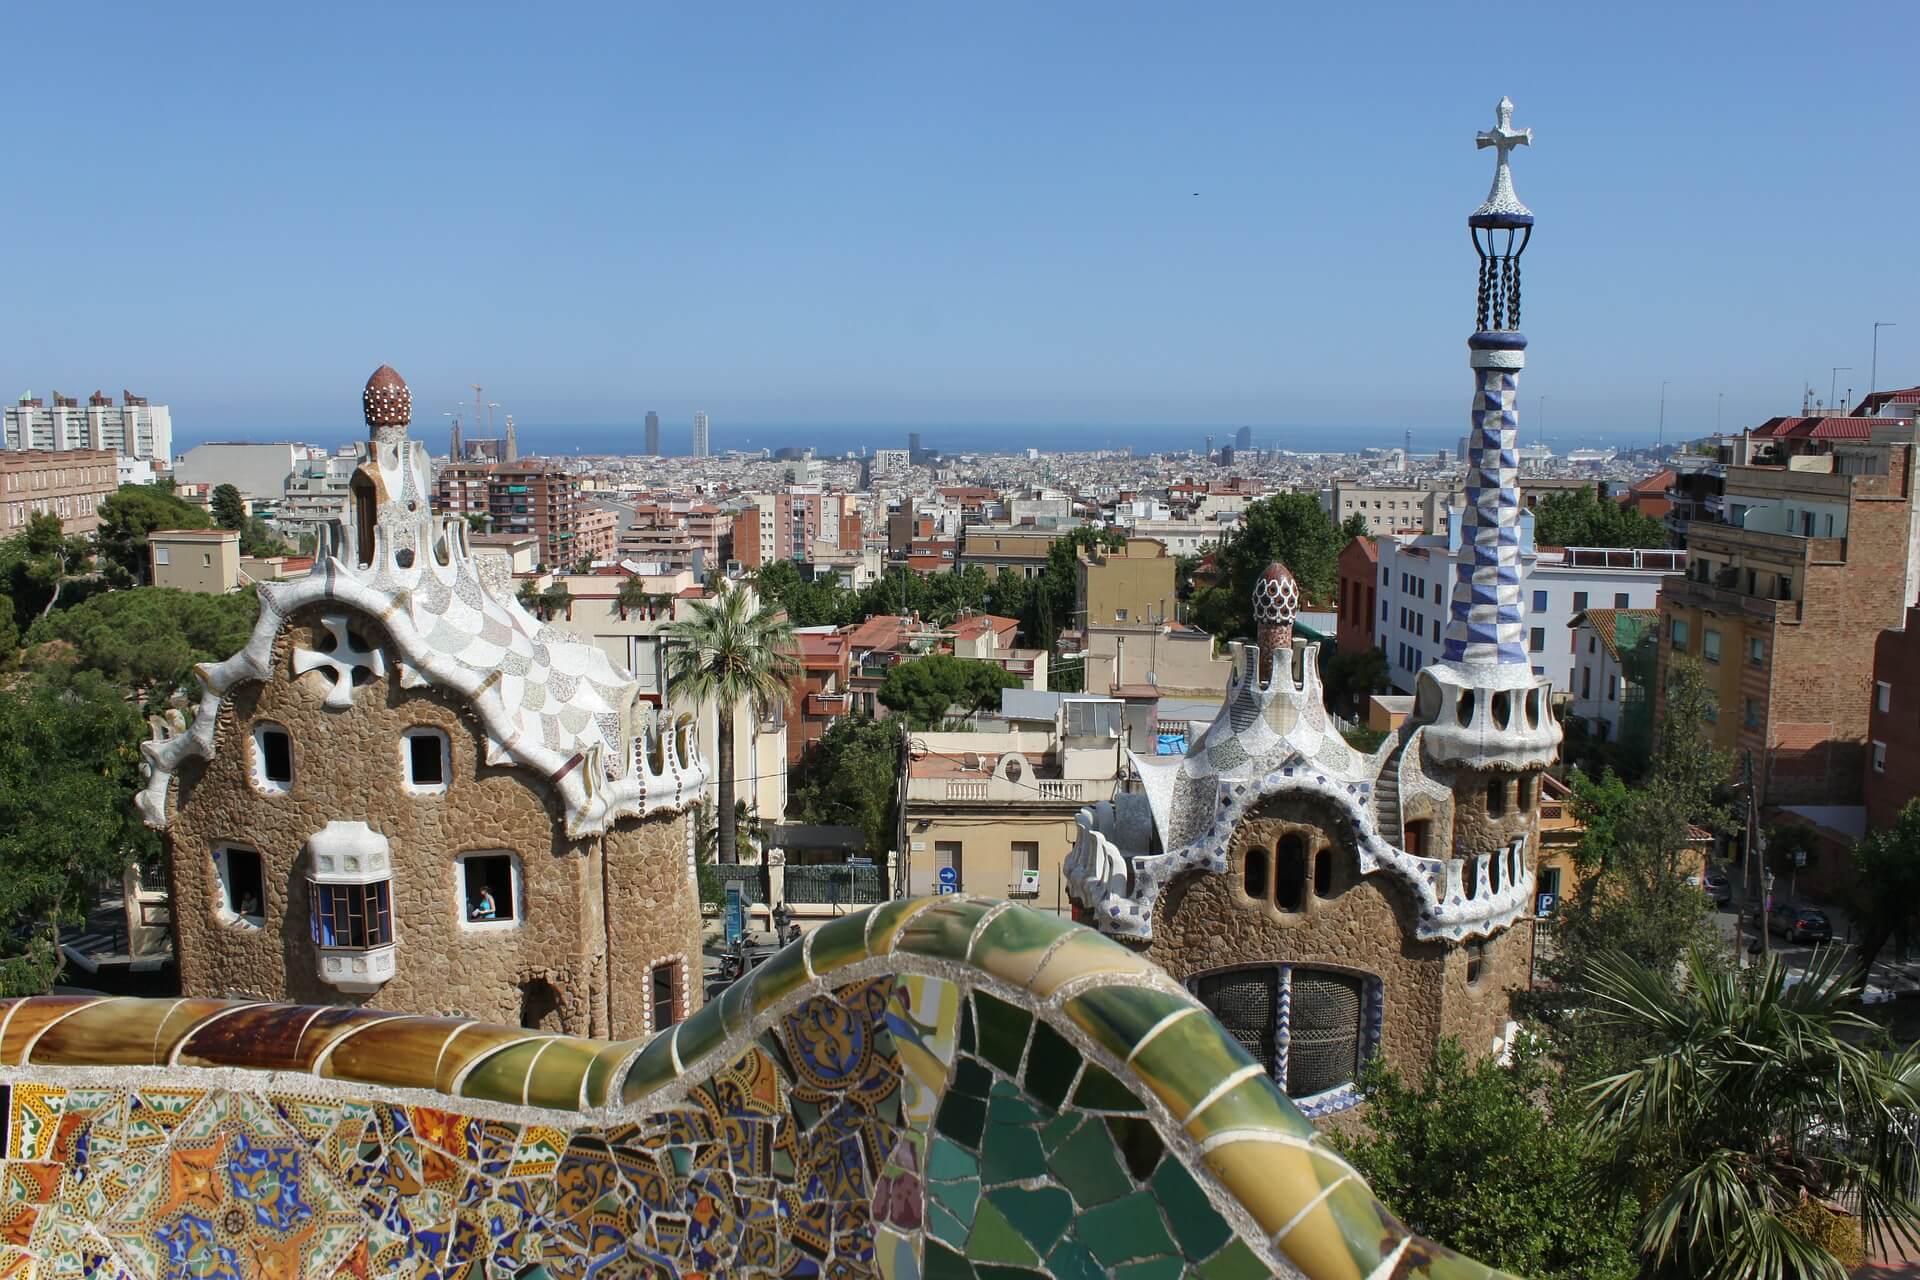 Park Guell from above